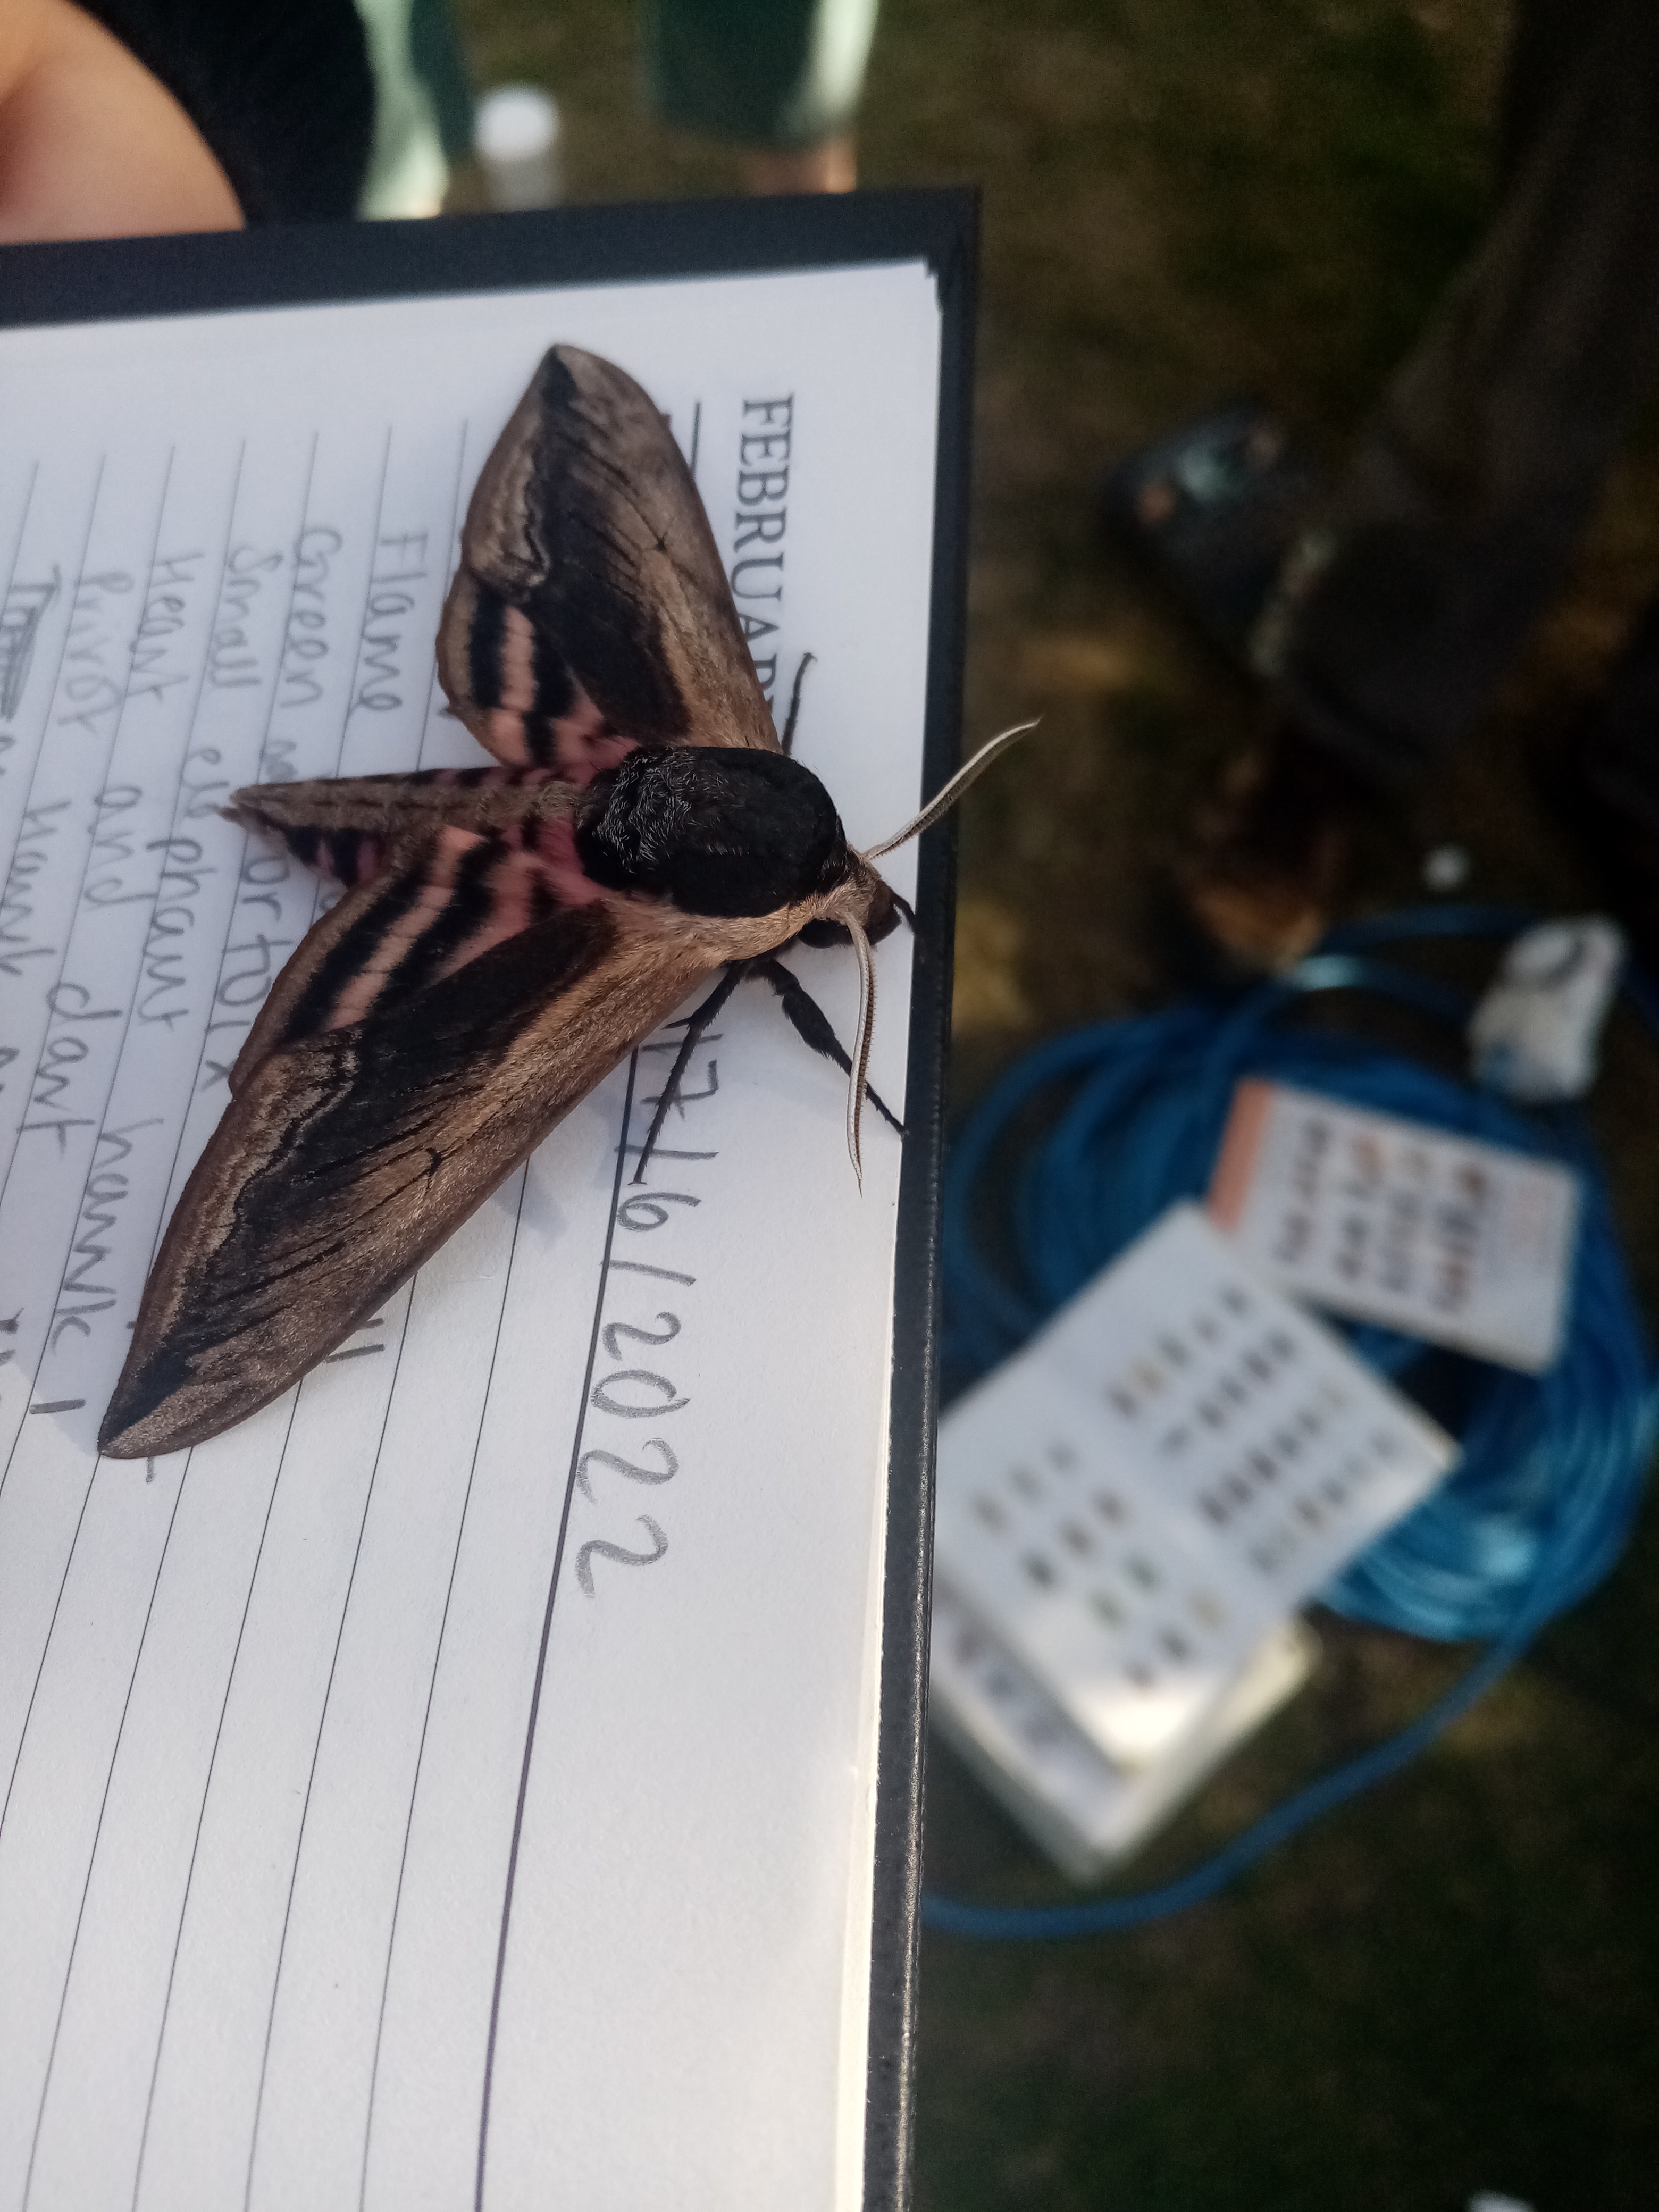 Colourful moth on a notebook